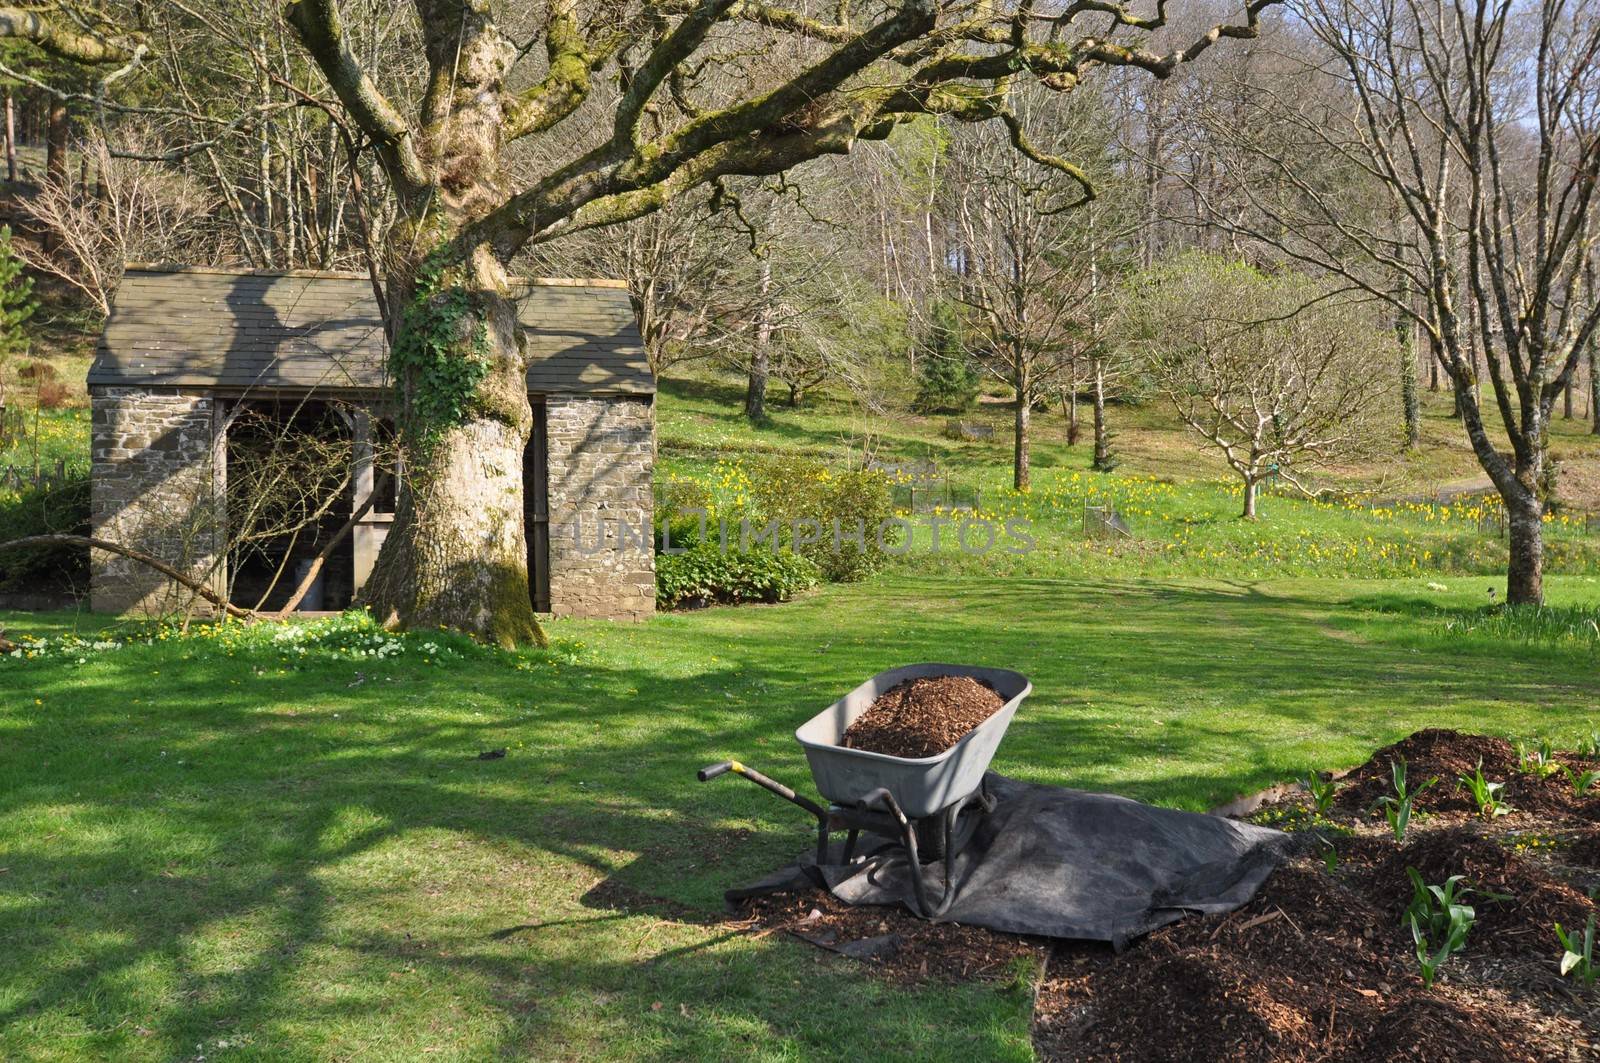 Garden outhouse and barrow. Set within a large English country garden in spring.